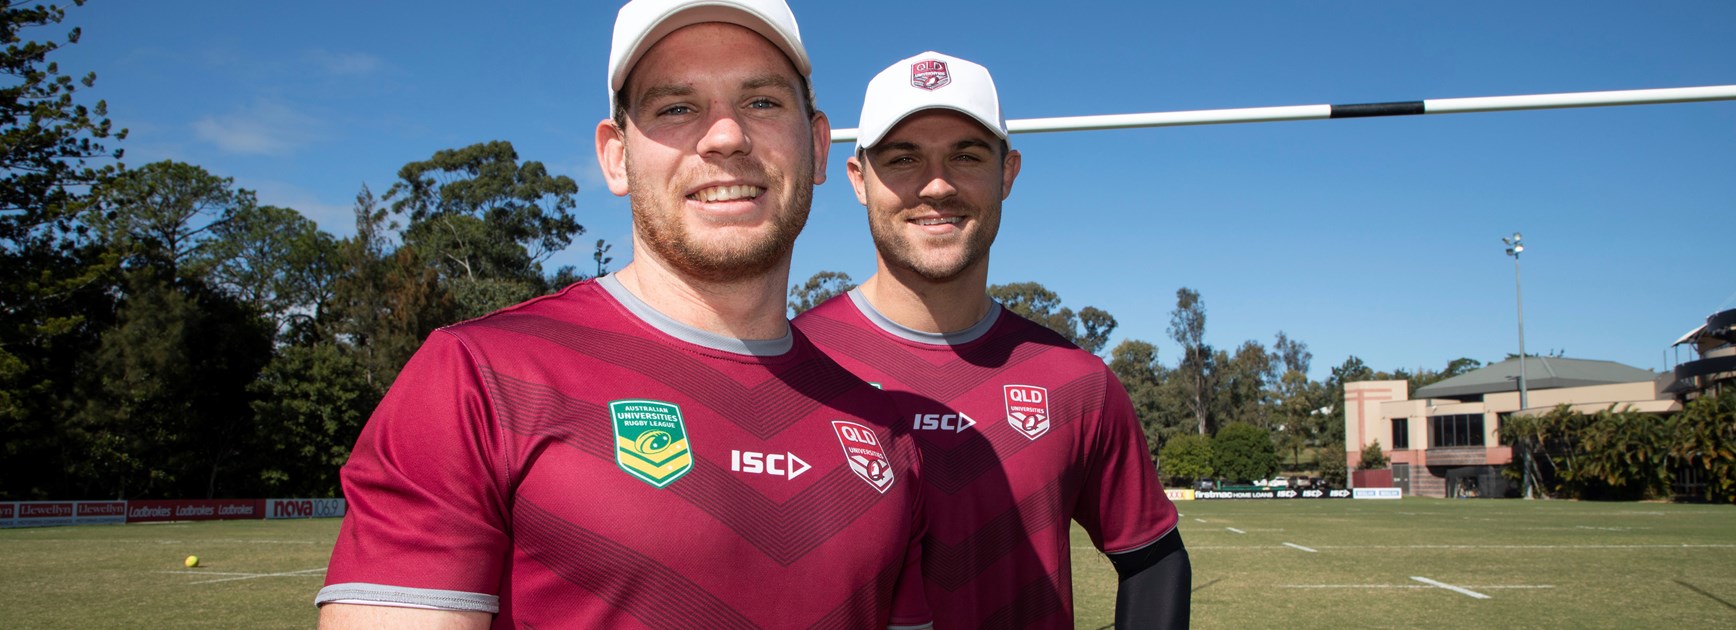 Tigers to spark QLD in Sunday's Uni challenge